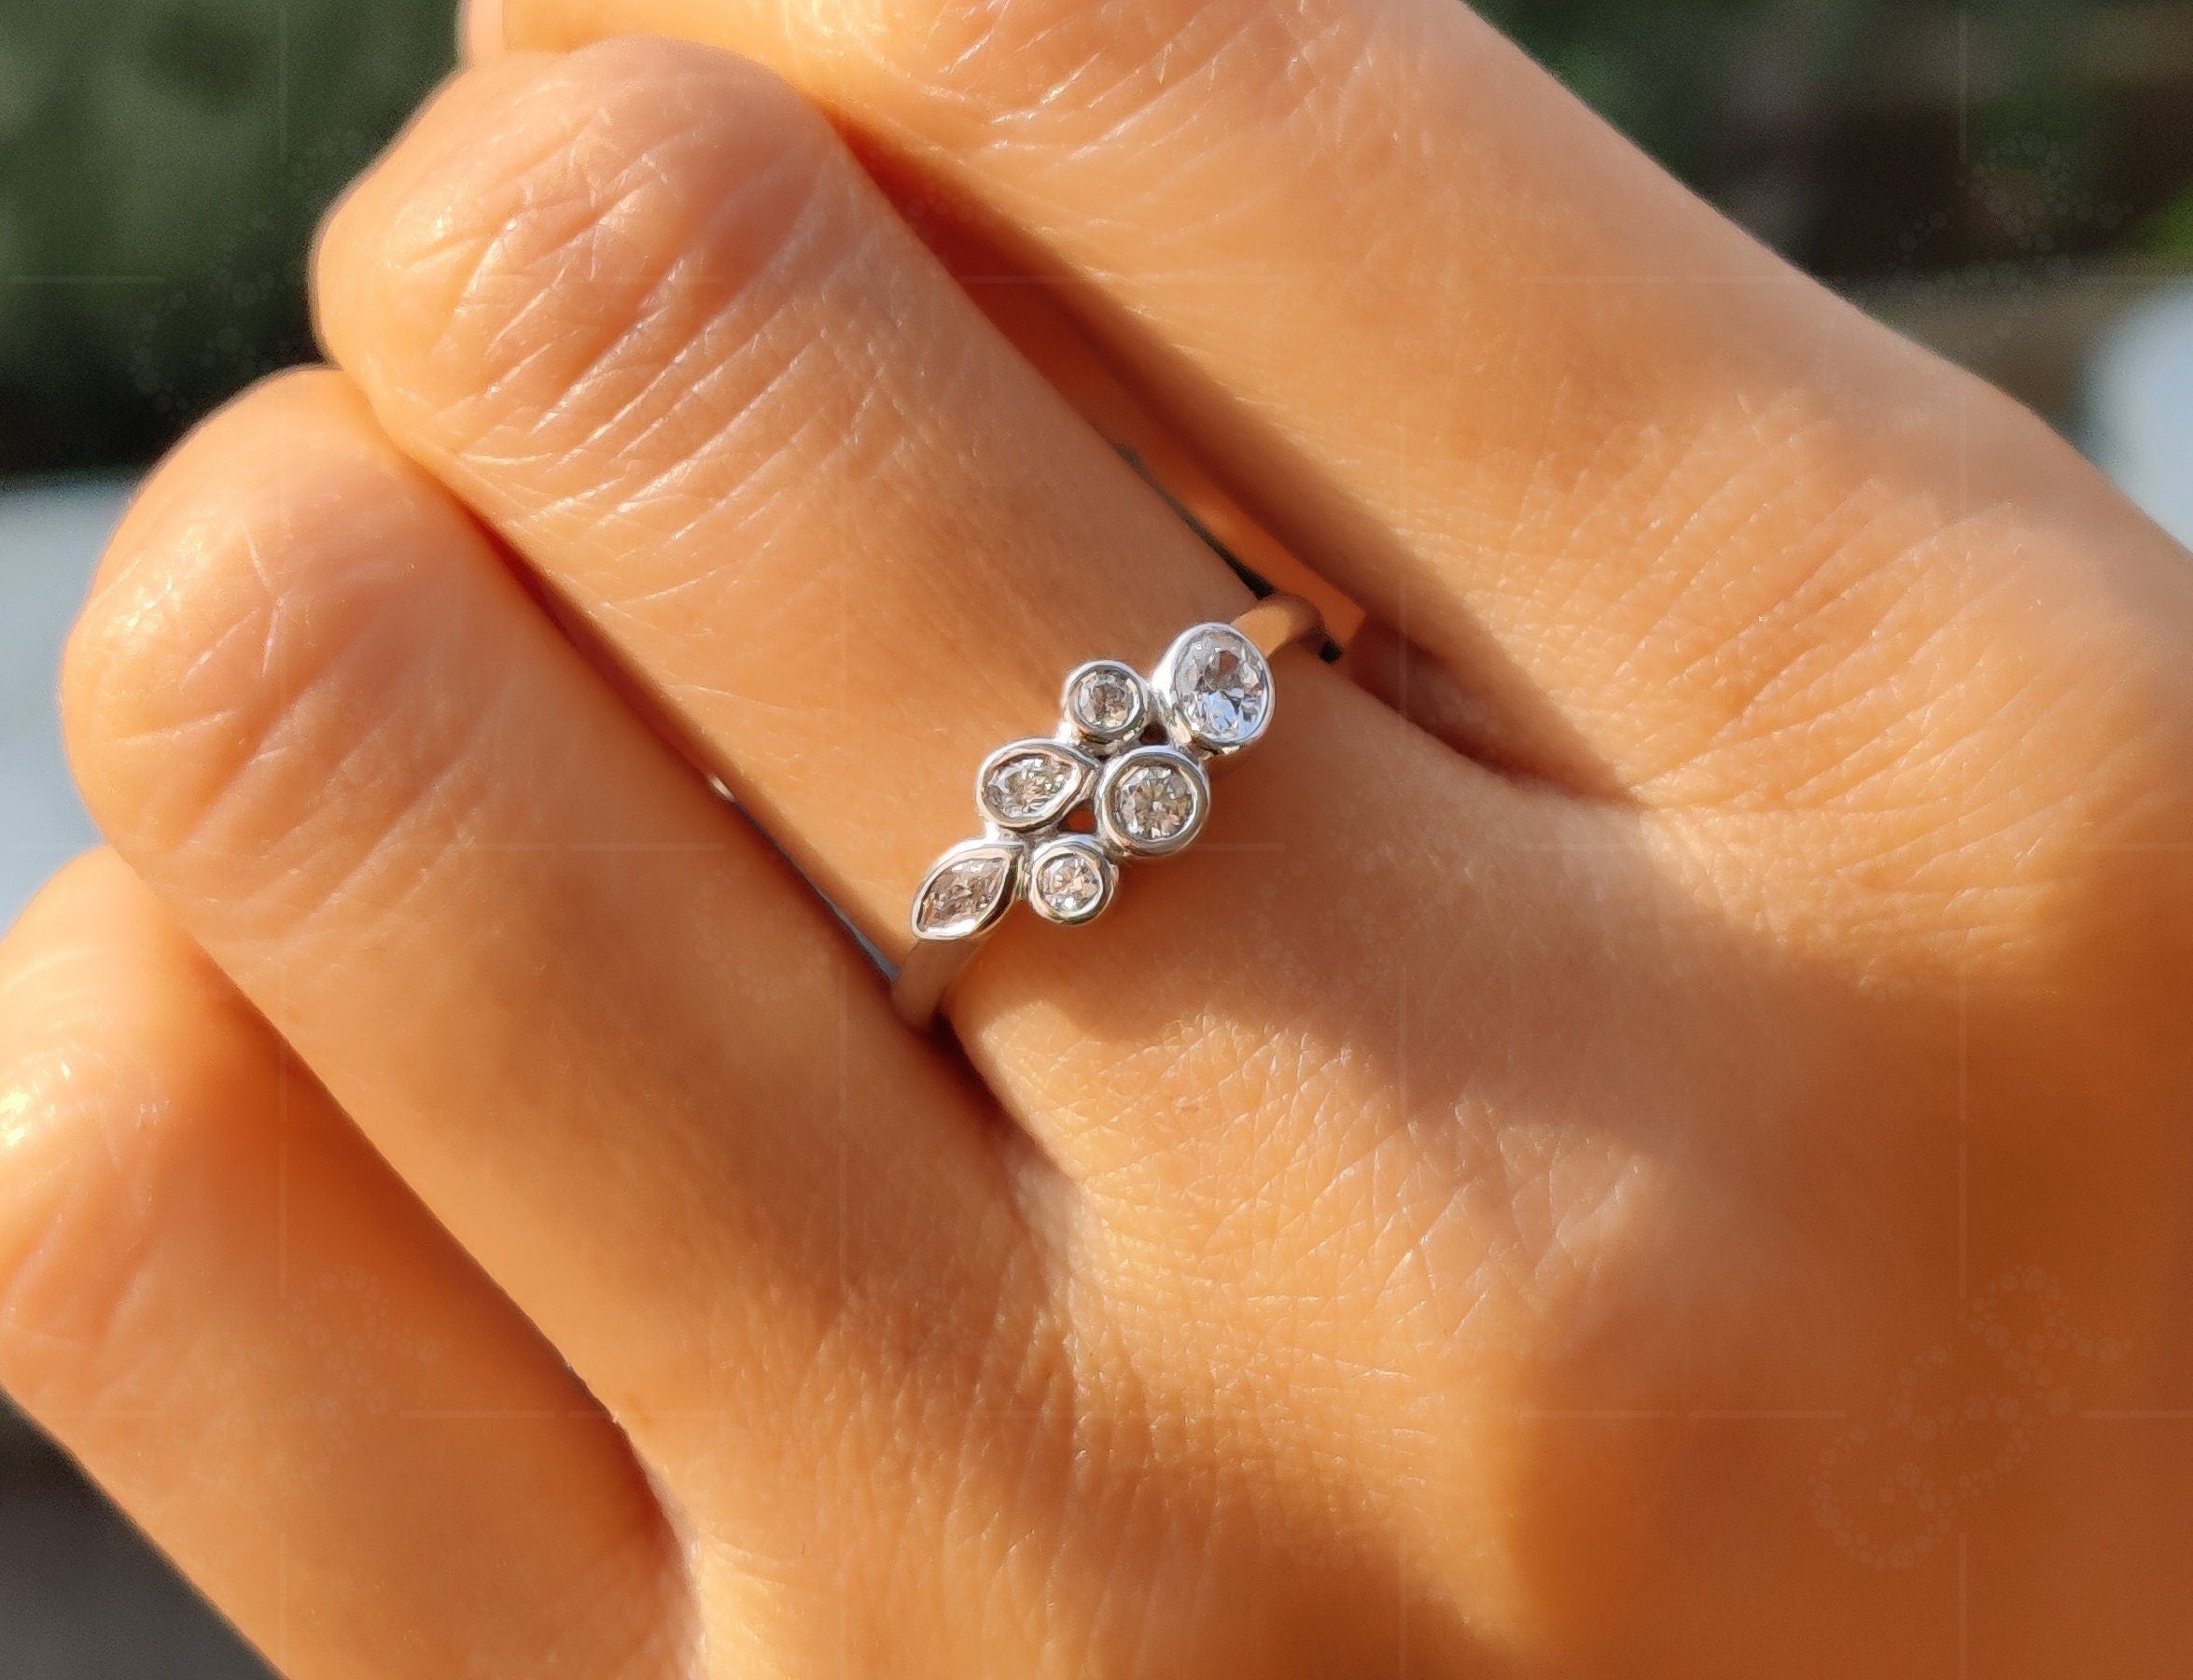 Raindrop Ring: A Delicate Gold Beauty with Multi Stone Scattered Moissanite, Perfect for Minimalist Elegance